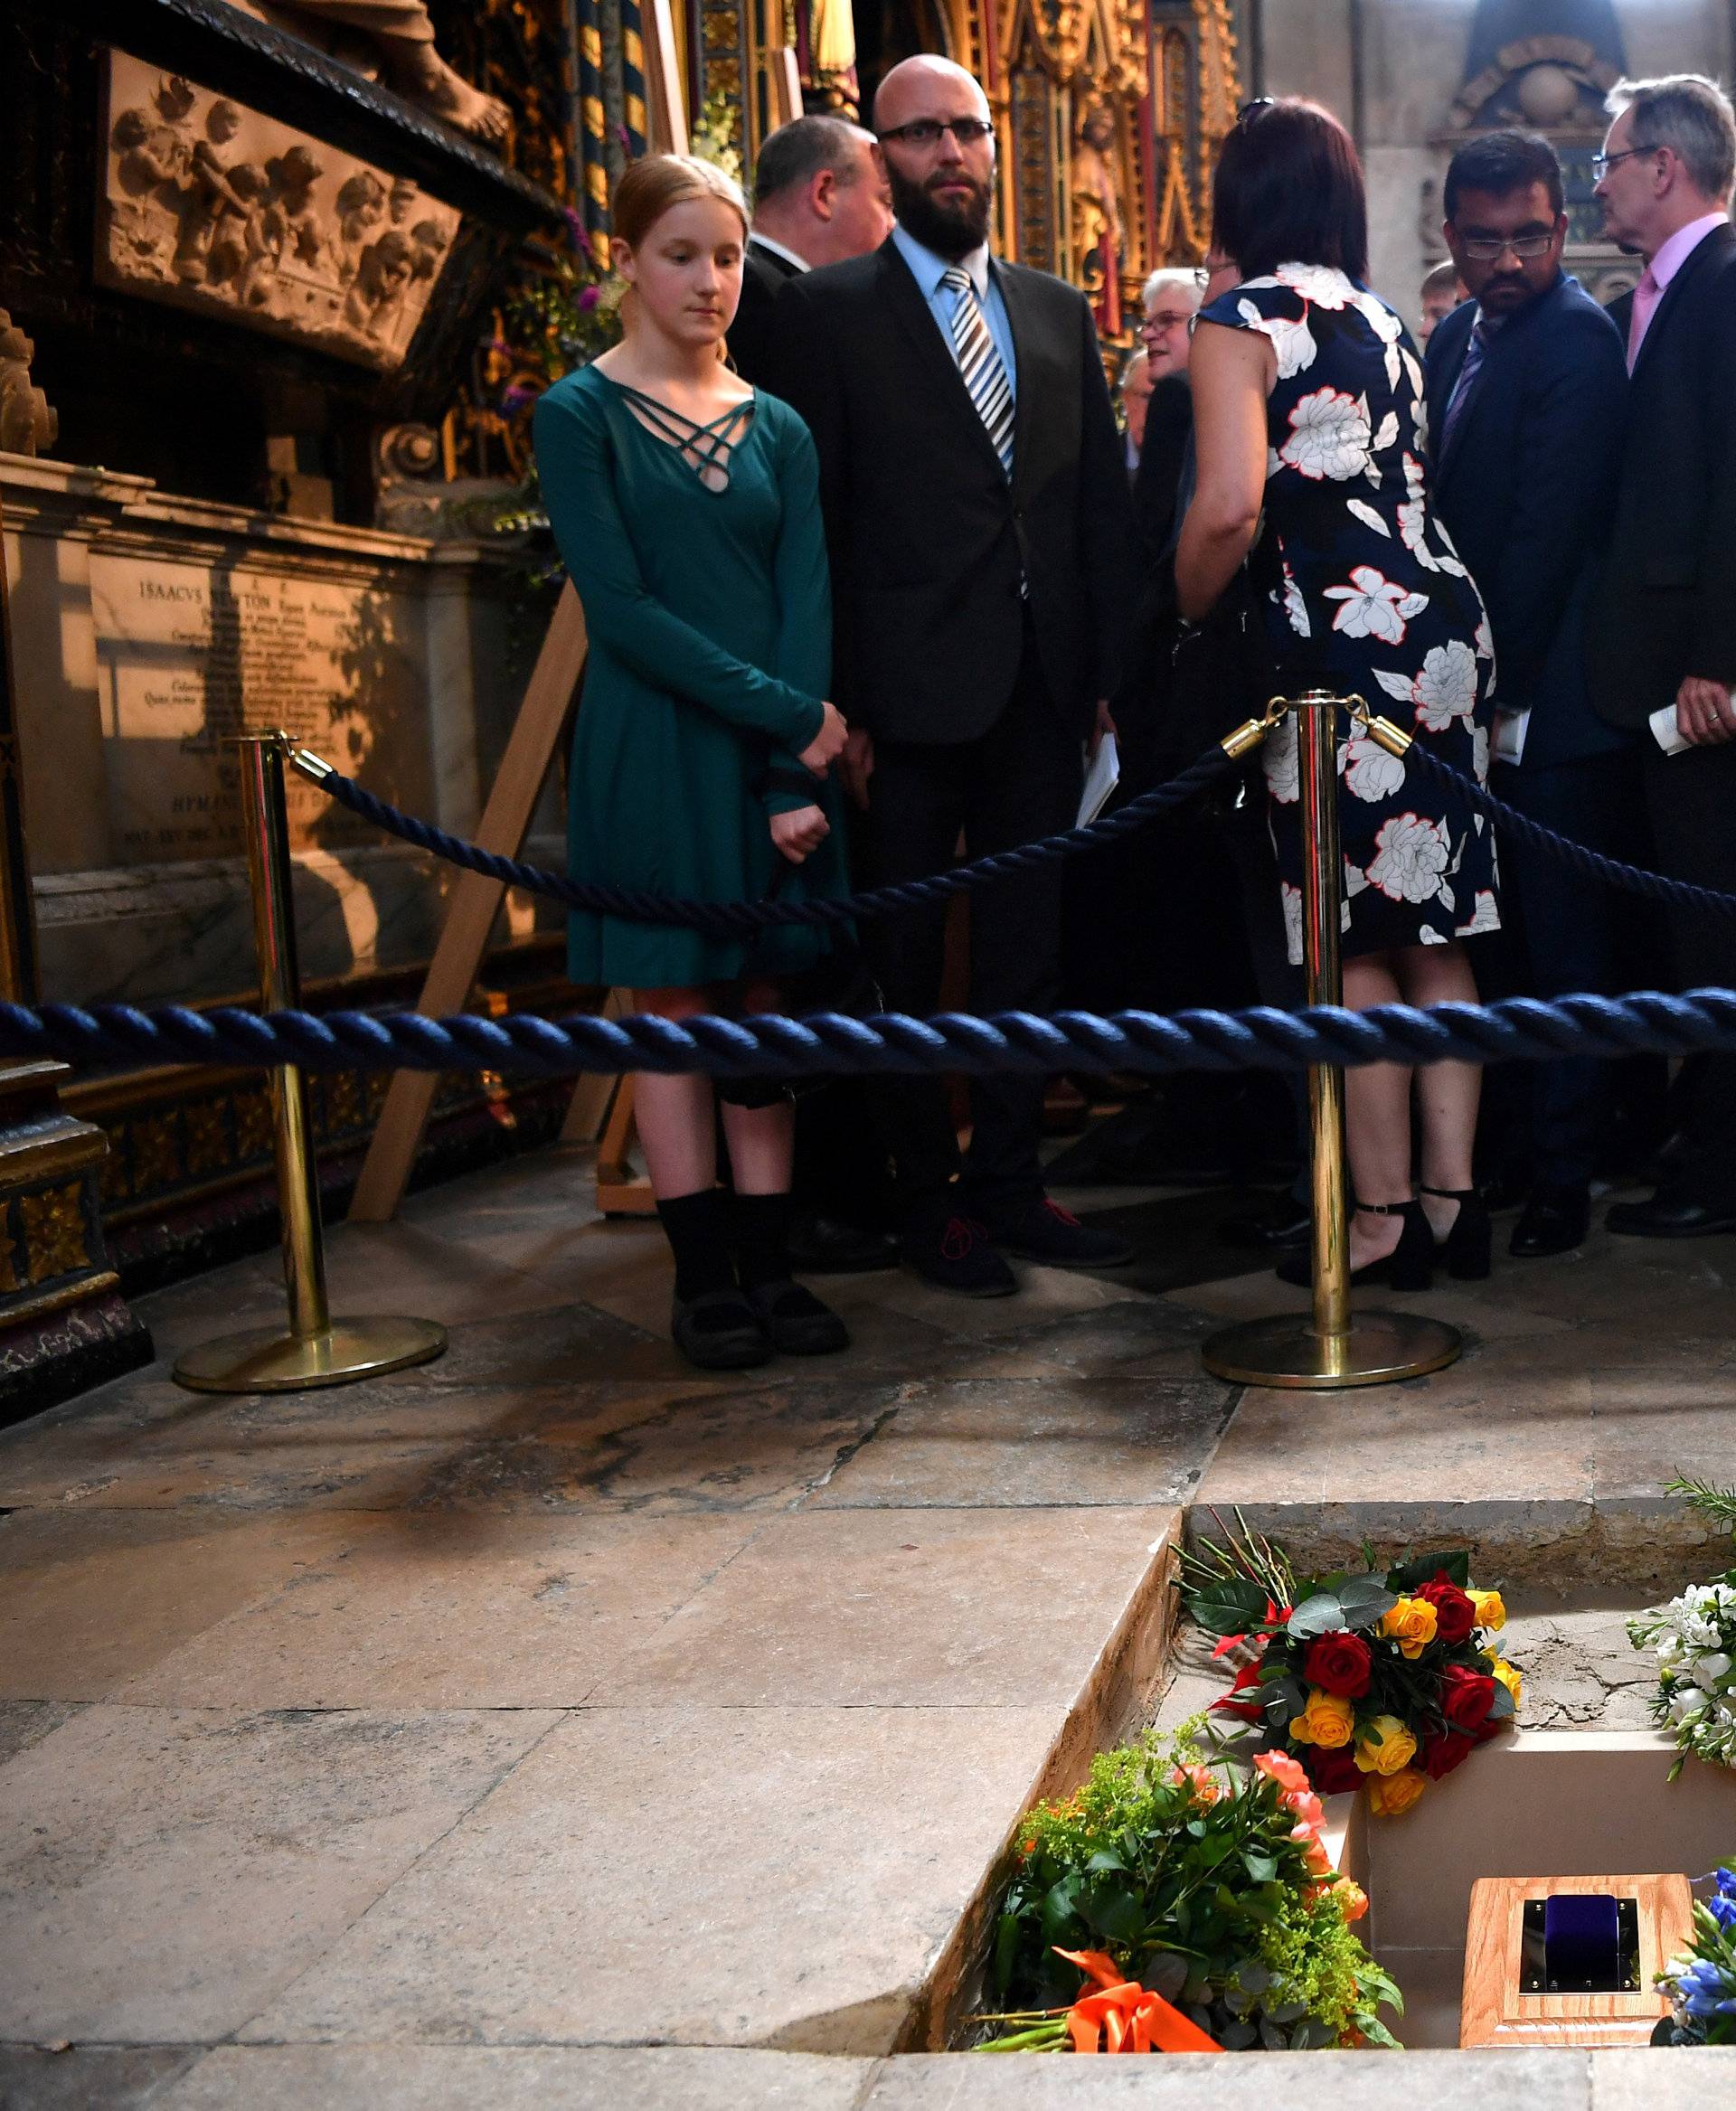 Members of the congregation file past the ashes of British scientist Stephen Hawking at the site of their interment in the nave of the Abbey church, during a memorial service at Westminster Abbey, in London